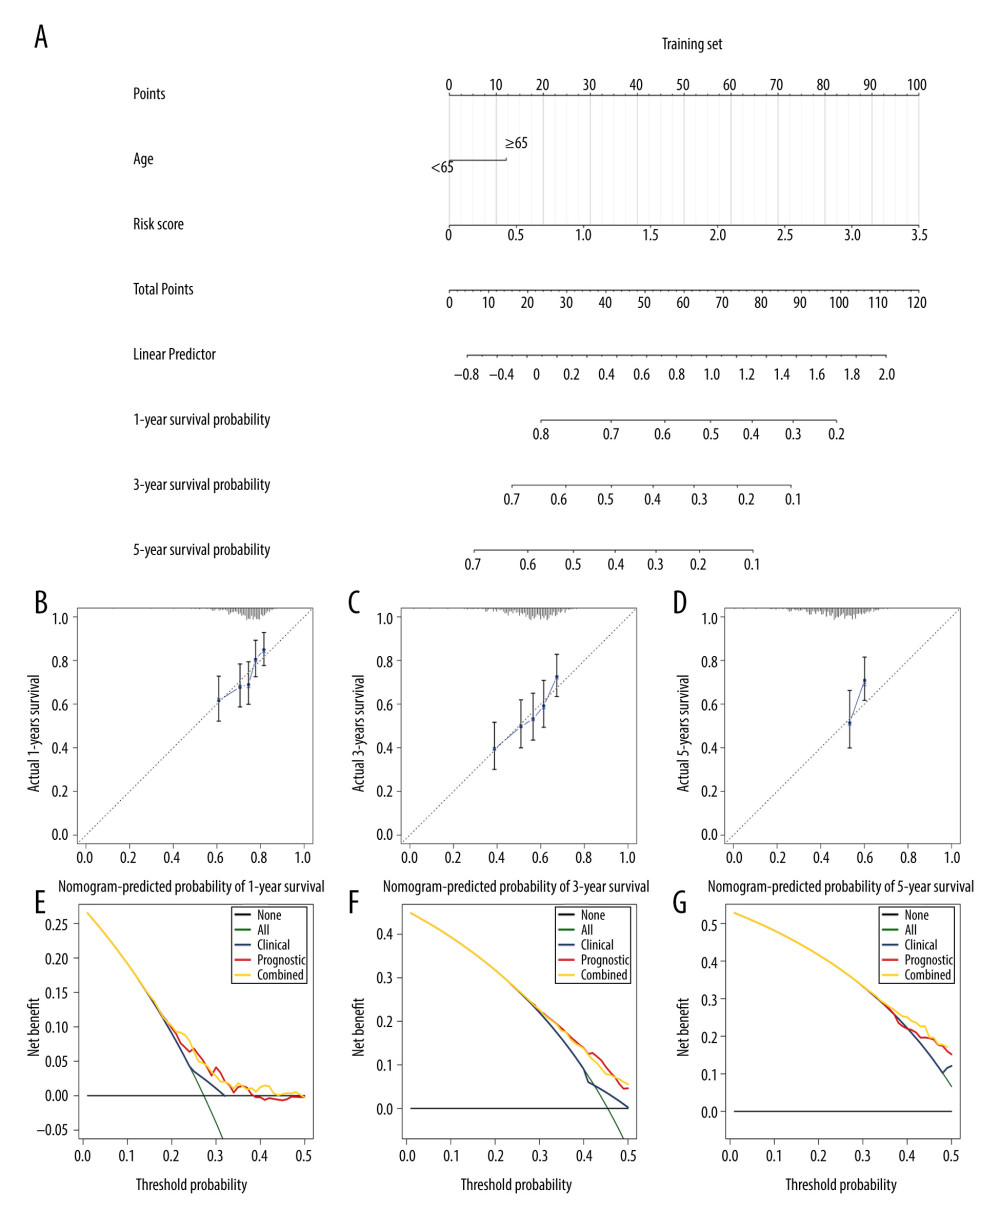 Validation of the nomogram model combining risk score and age in the validation cohort. (A) Nomogram for predicting the proportion of patients with overall survival after diagnosis of gastric cancer in the validation cohort. (B–D) Calibration plots of nomograms in terms of agreement between predicted and actual 1-, 3-, and 5-year outcomes. (E–G) Decision curve analysis of the nomogram model, age, and prognostic model for 1-, 3-, and 5-year survival time.